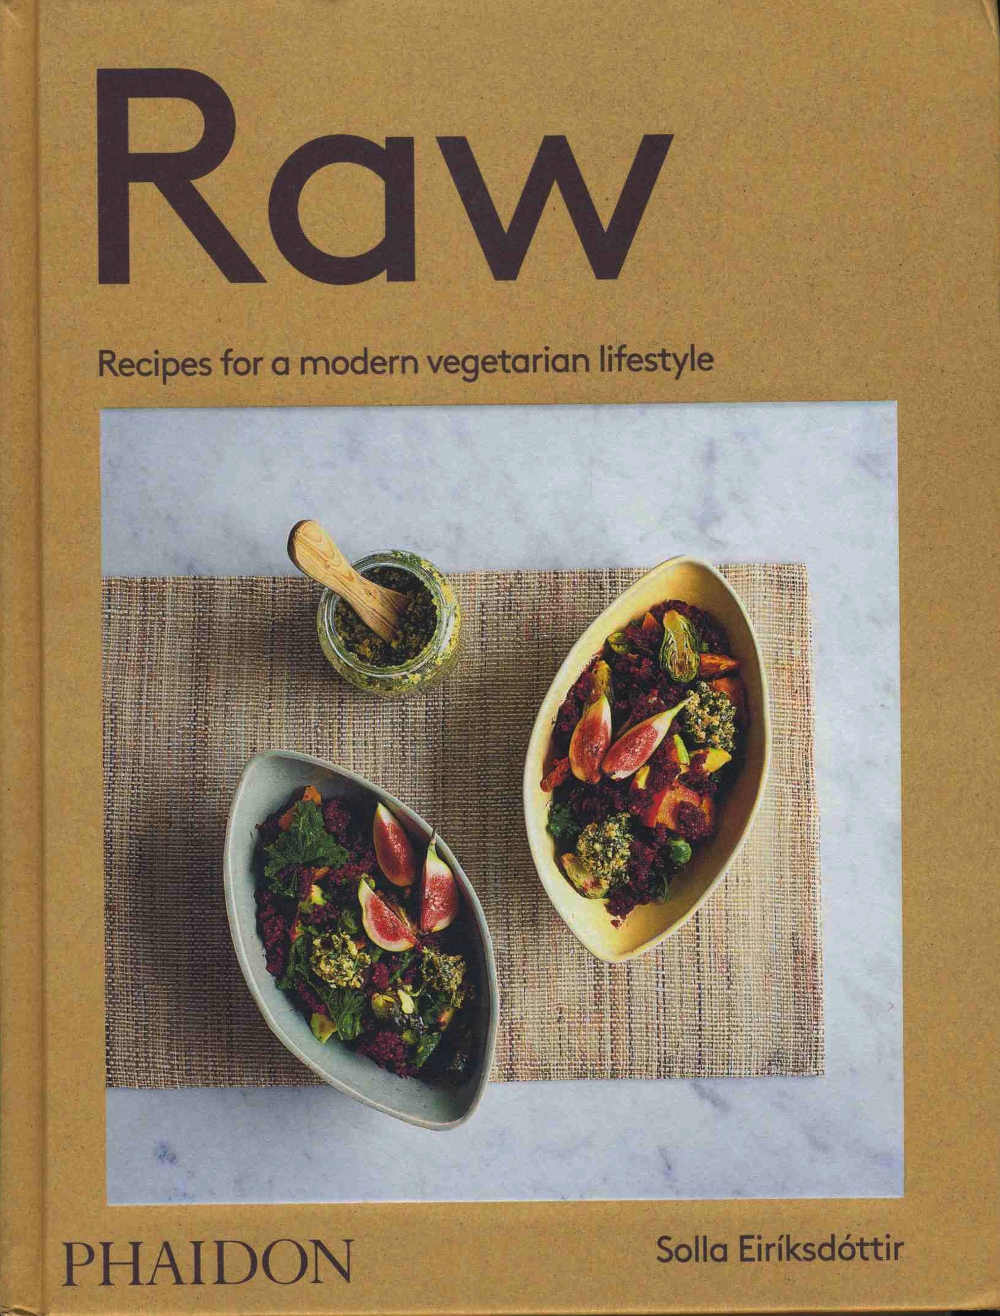 Raw: Recipes For a Modern Vegetarian Lifestyle by Solla EirÃ­ksdÃ³ttir Published by Phaidon; hardback, 240 pp, 100 specially commissioned photographs; Â£24.95/â‚¬34.95.